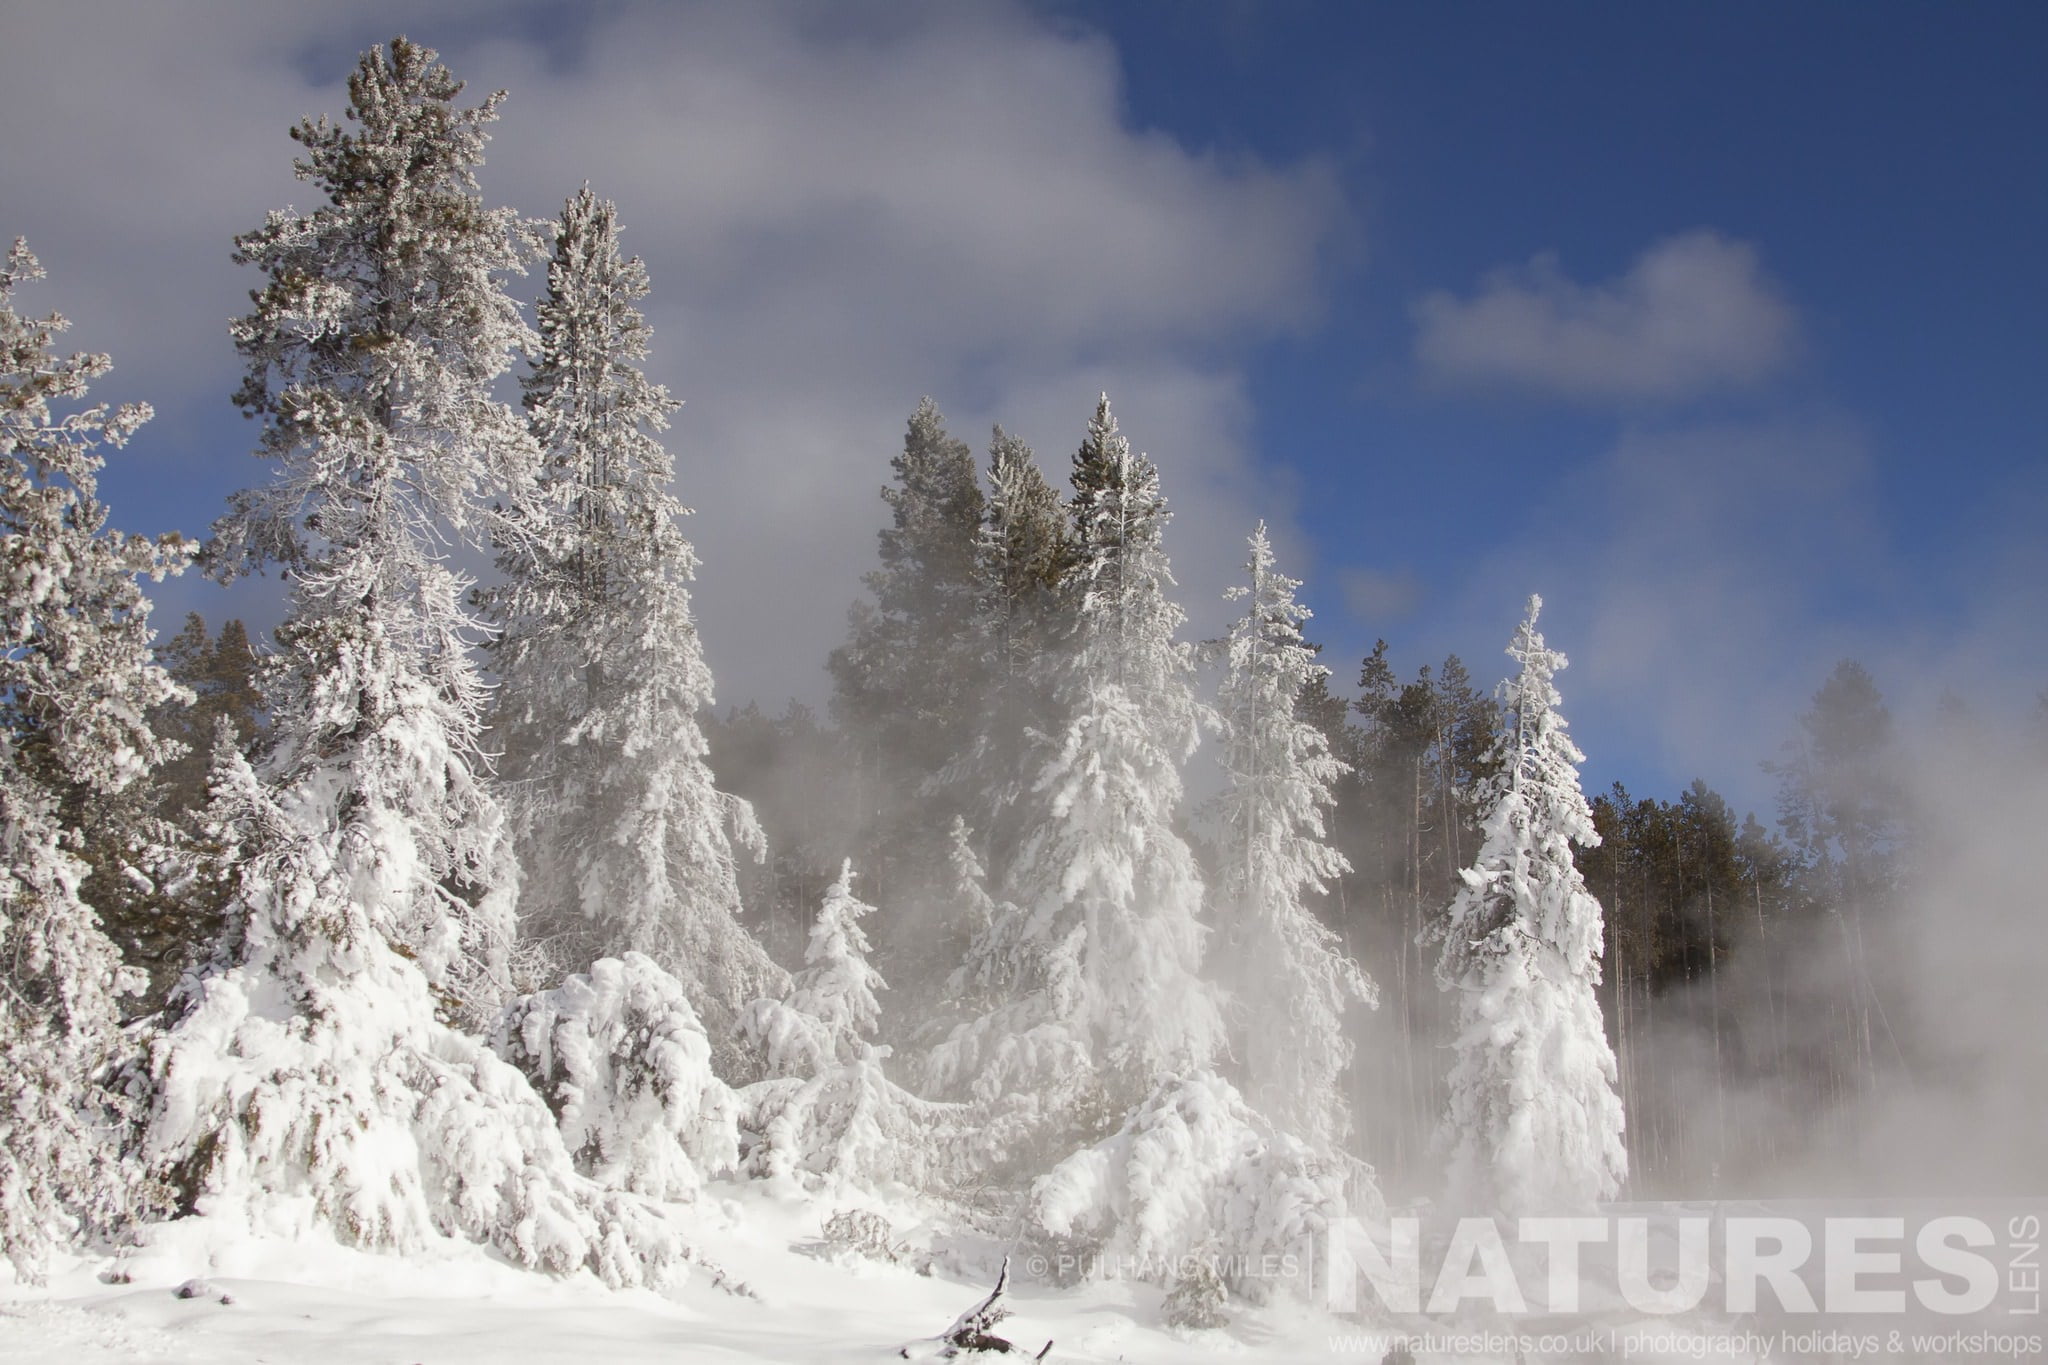 Snow Clad Trees Make For Impressive Images Typical Of The Type Of Image That You Will Capture During The Wildlife Of Yellowstone In Winter Photography Holiday